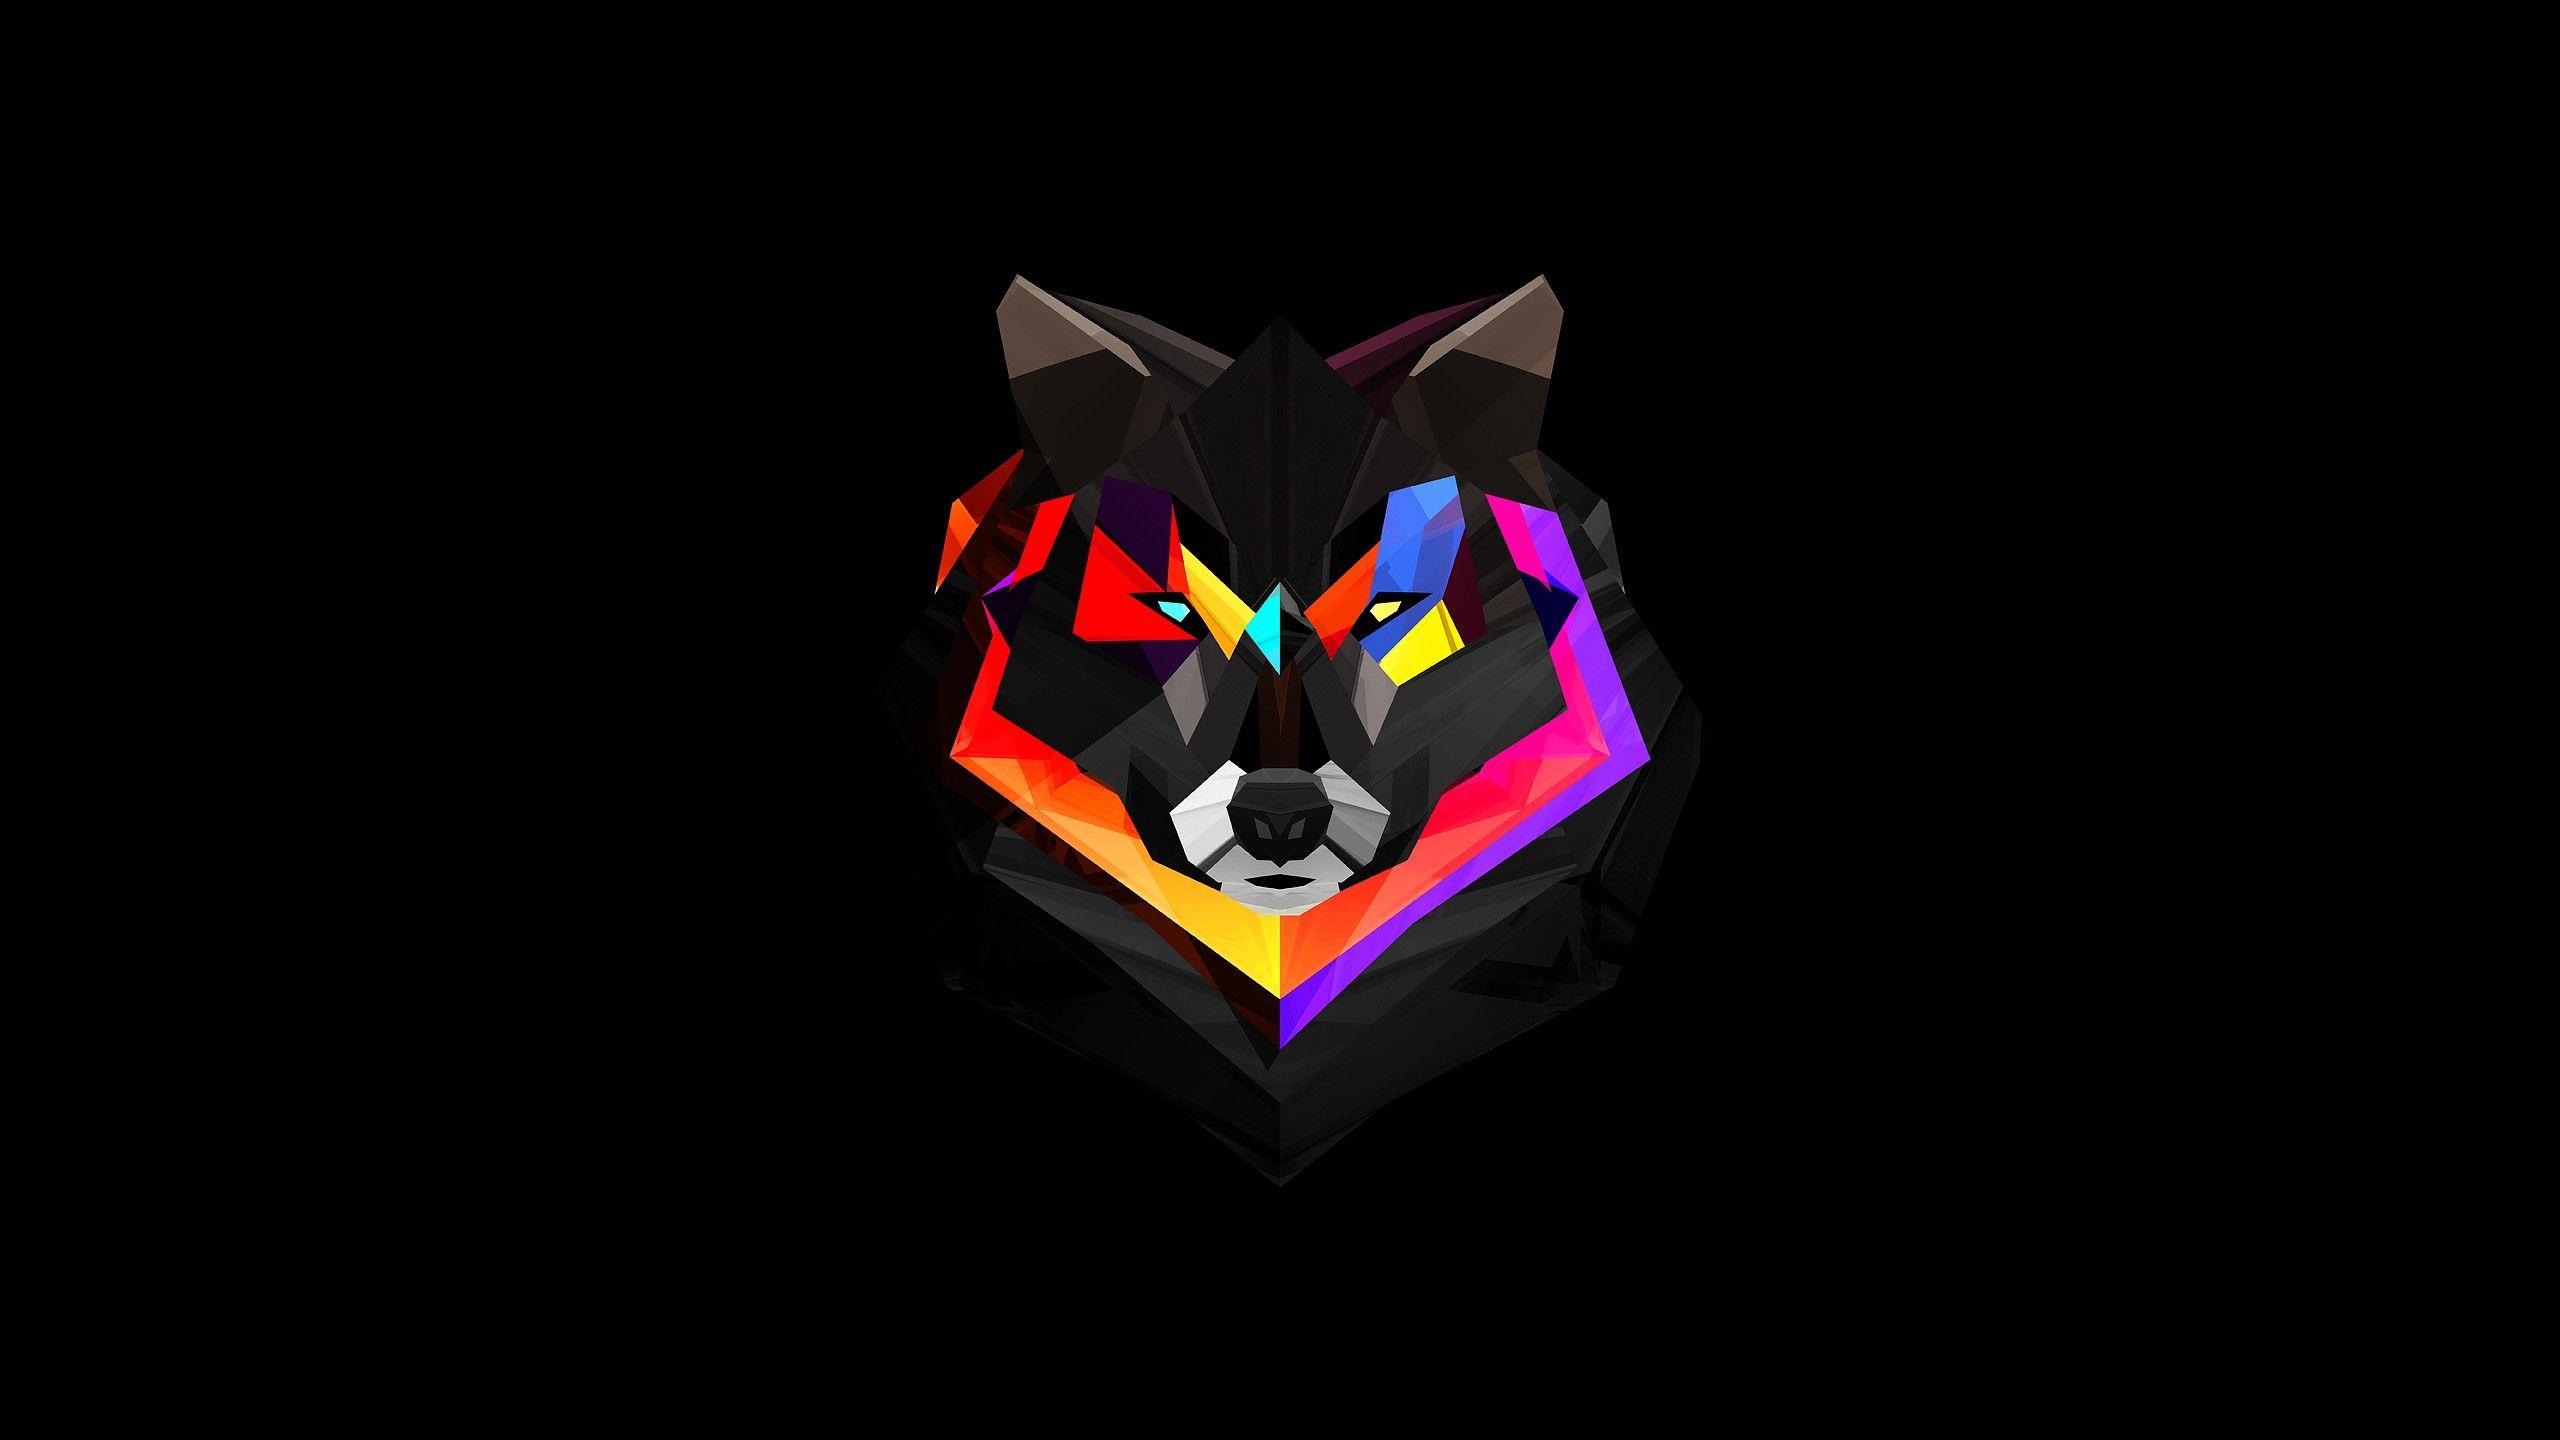 Polygon. Polygon art, Wolf wallpaper, Abstract wolf